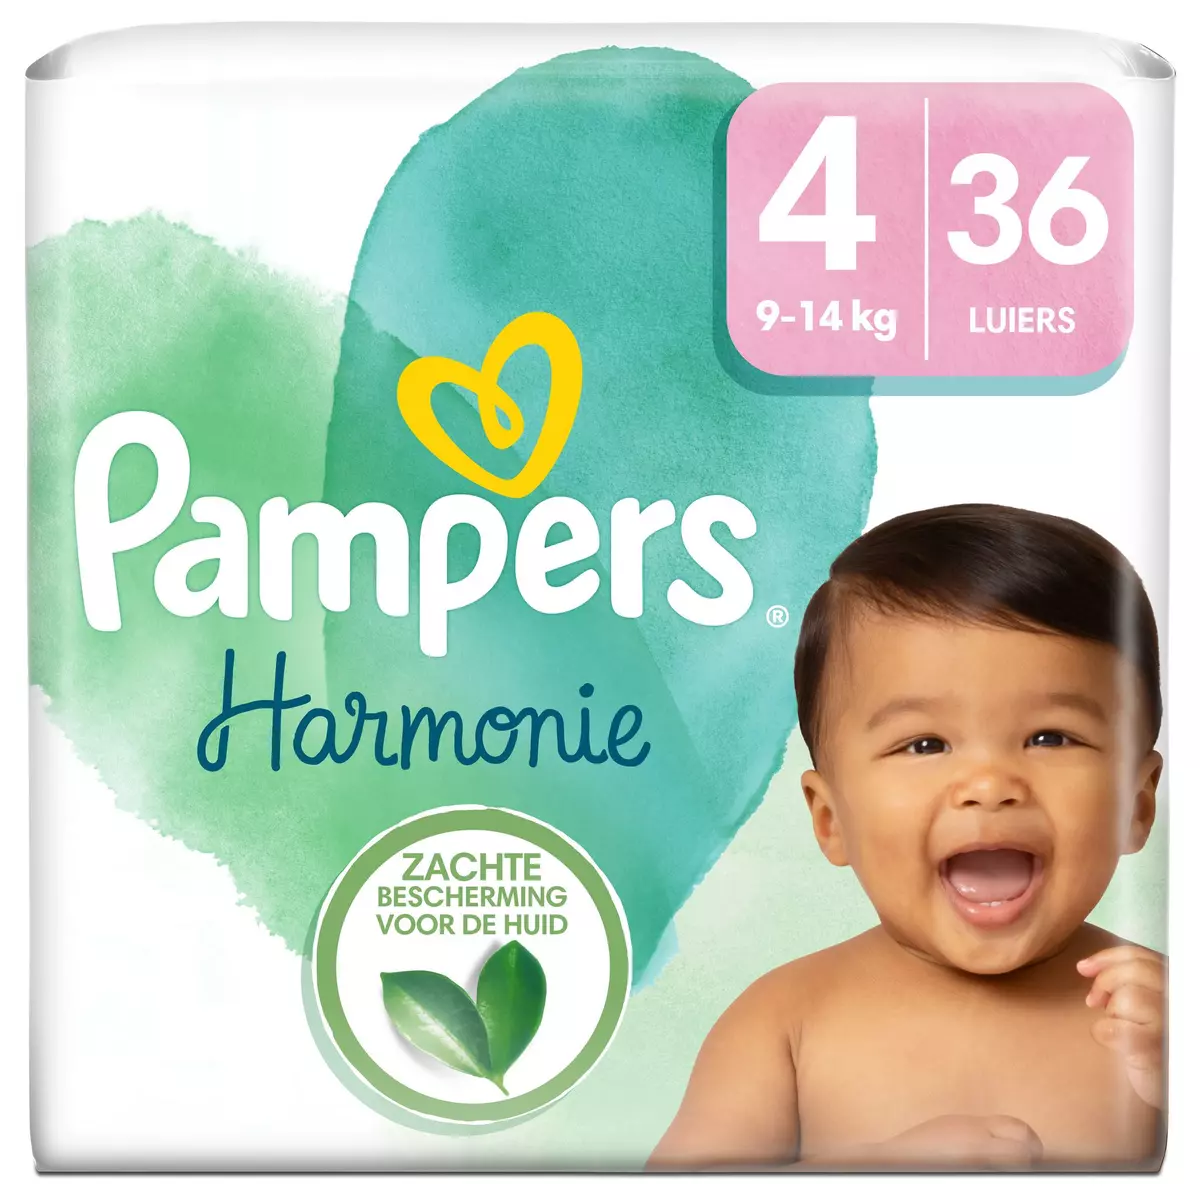 PAMPERS Harmonie couches taille 4 (9-14kg) 36 couches